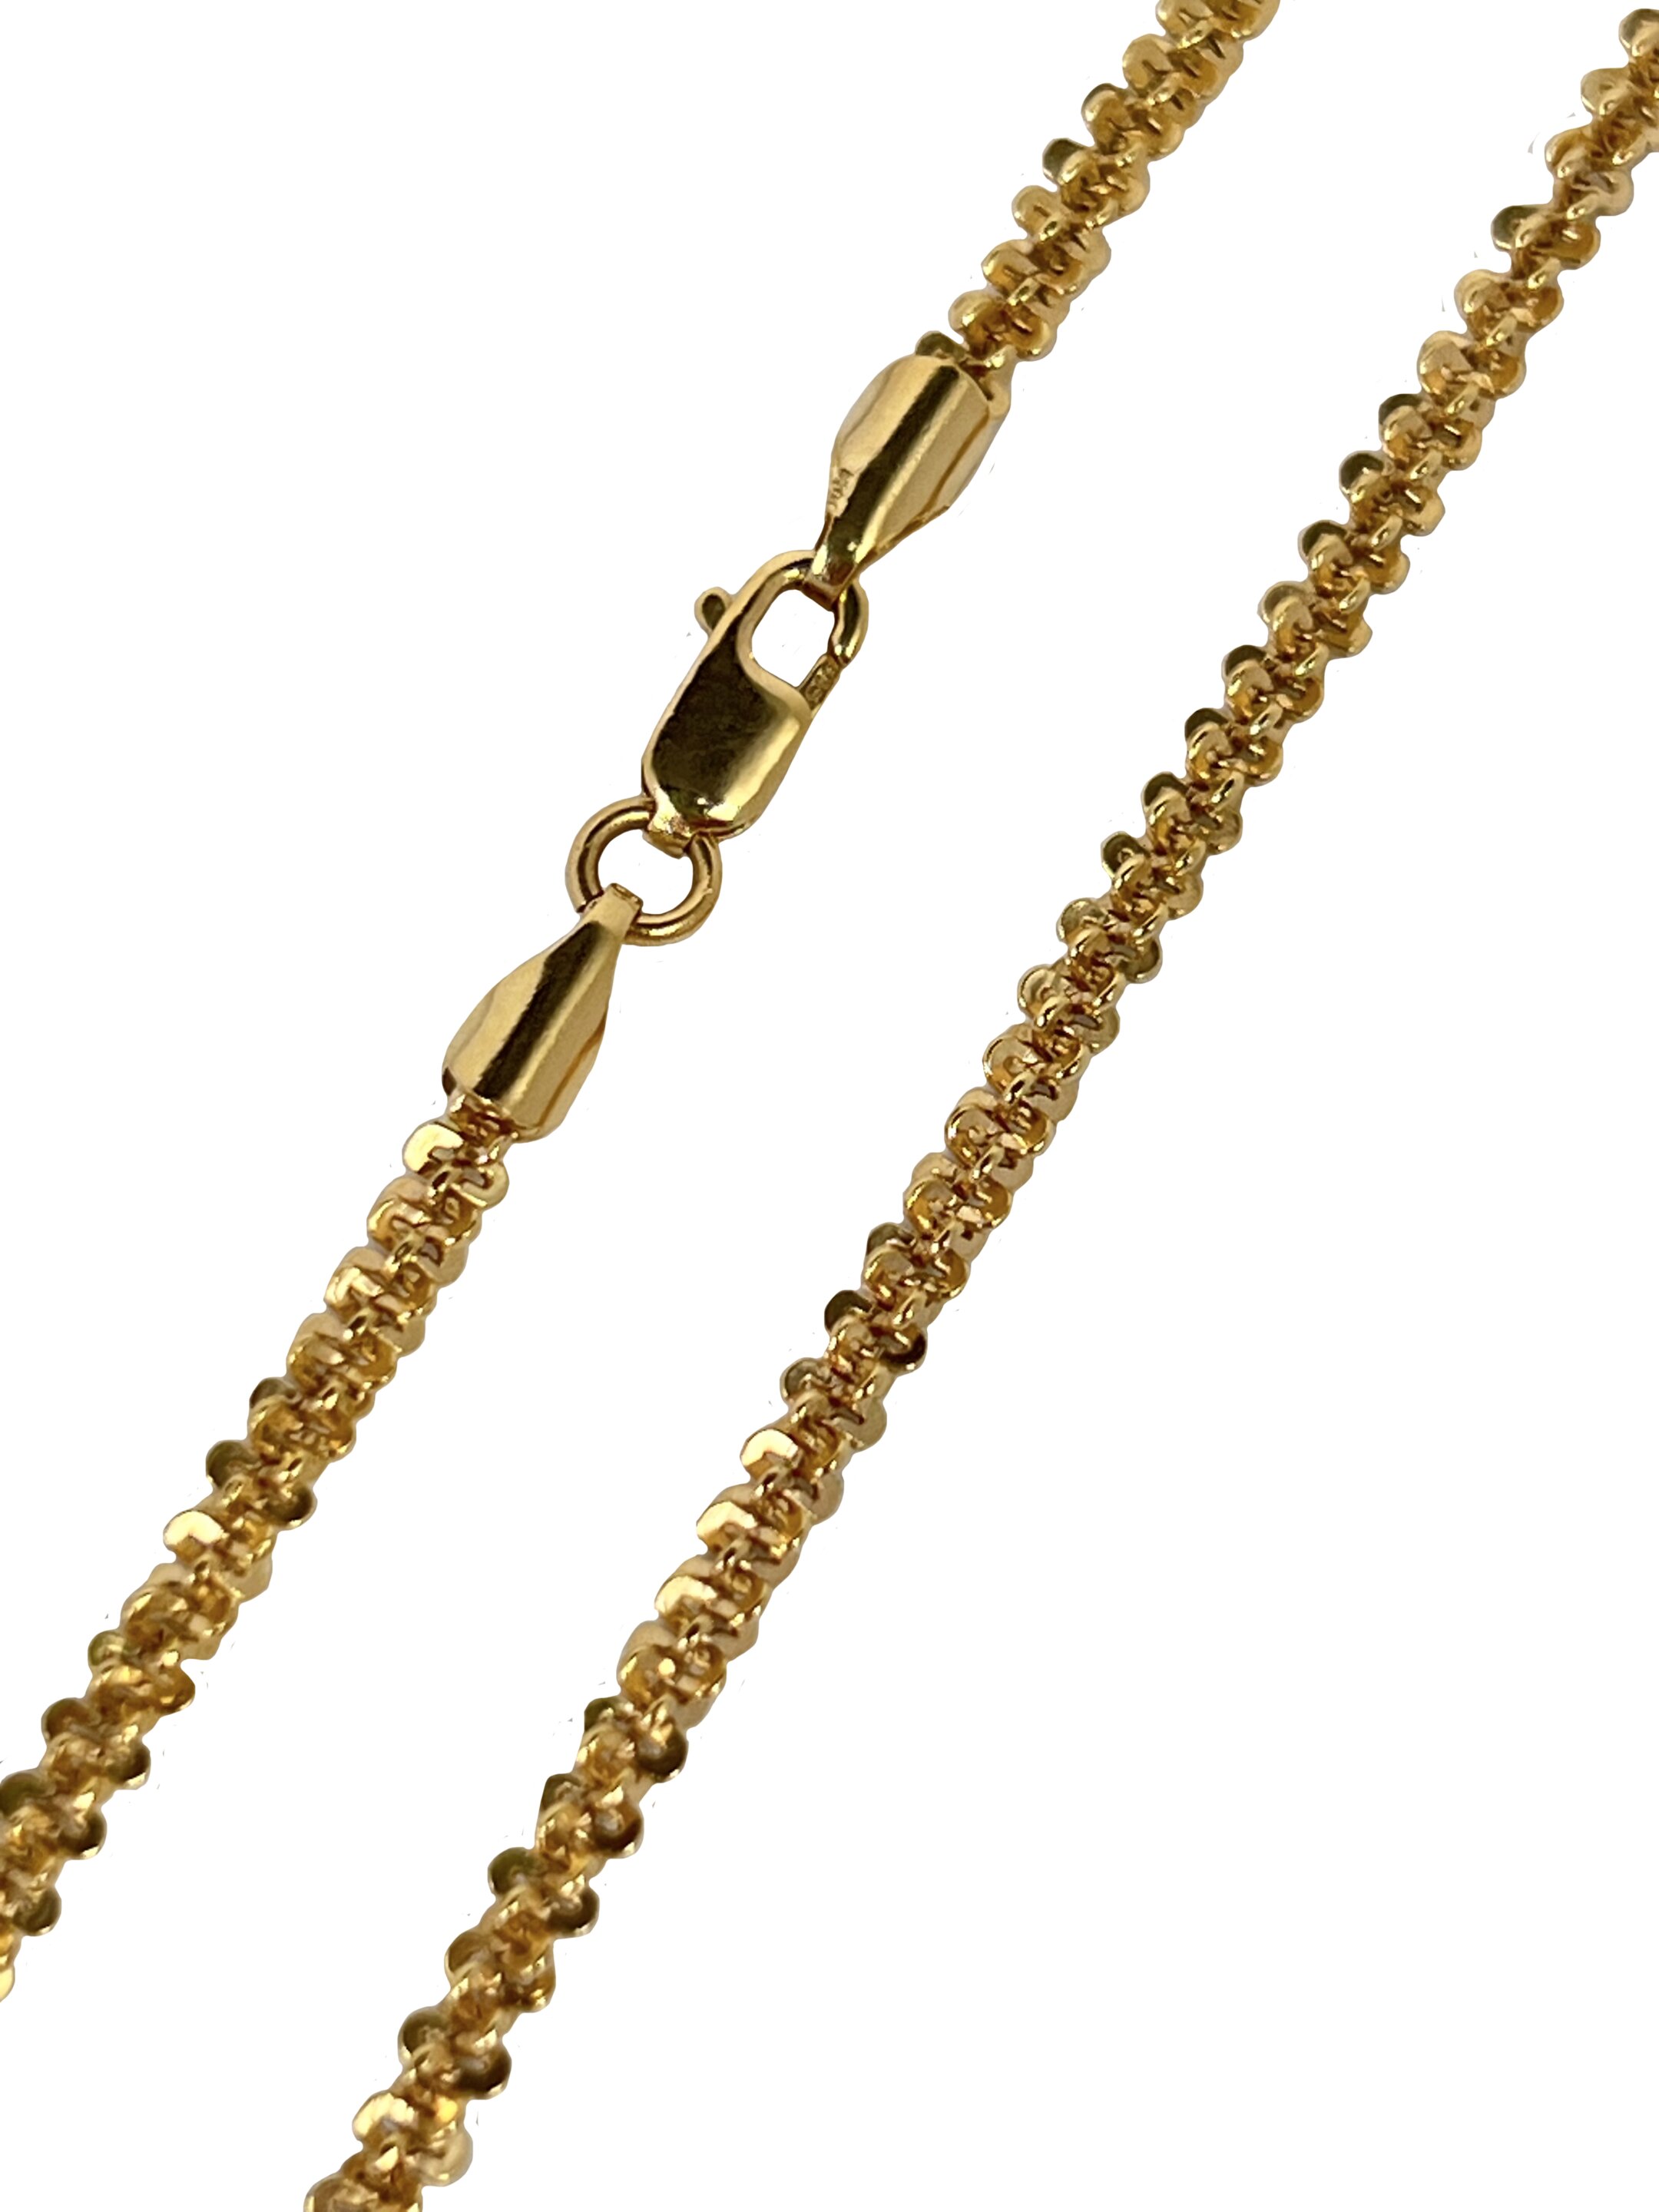 Gold chain Patterned 2.8 mm